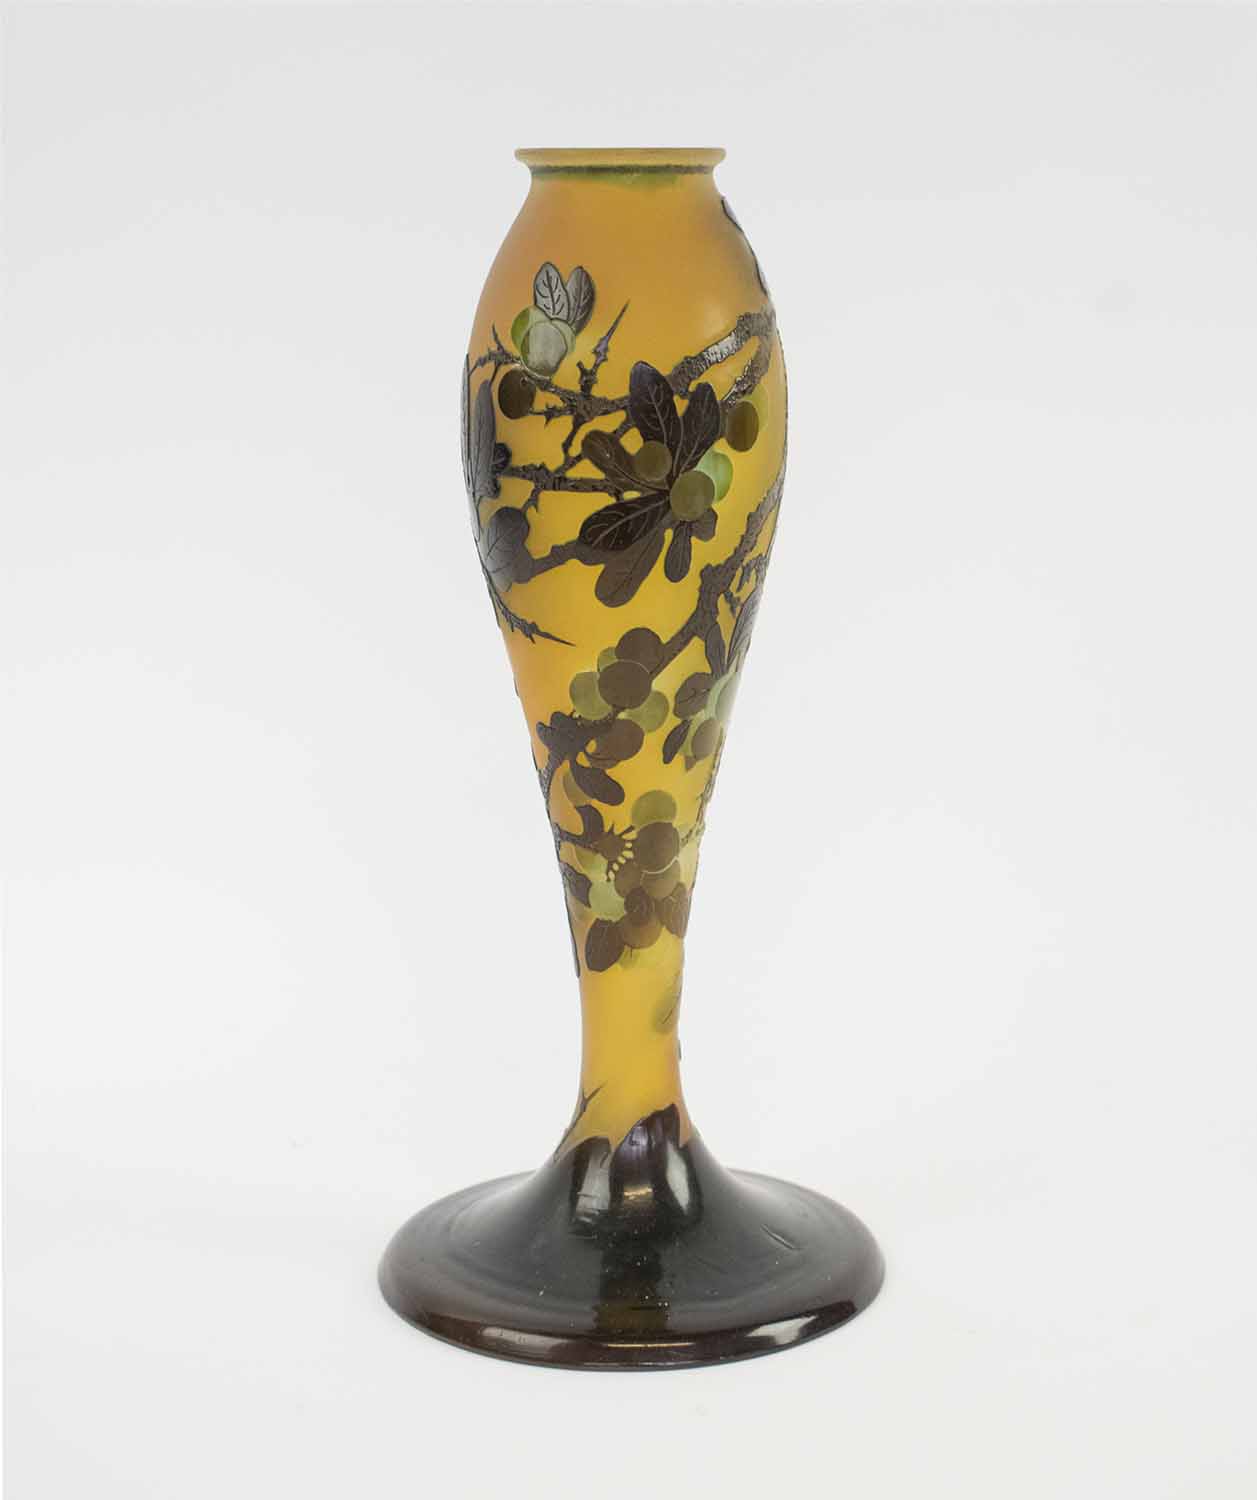 EMILLE GALLE (1846-1904), peaches Cameo glass lamp base, circa 1920, signed Galle.